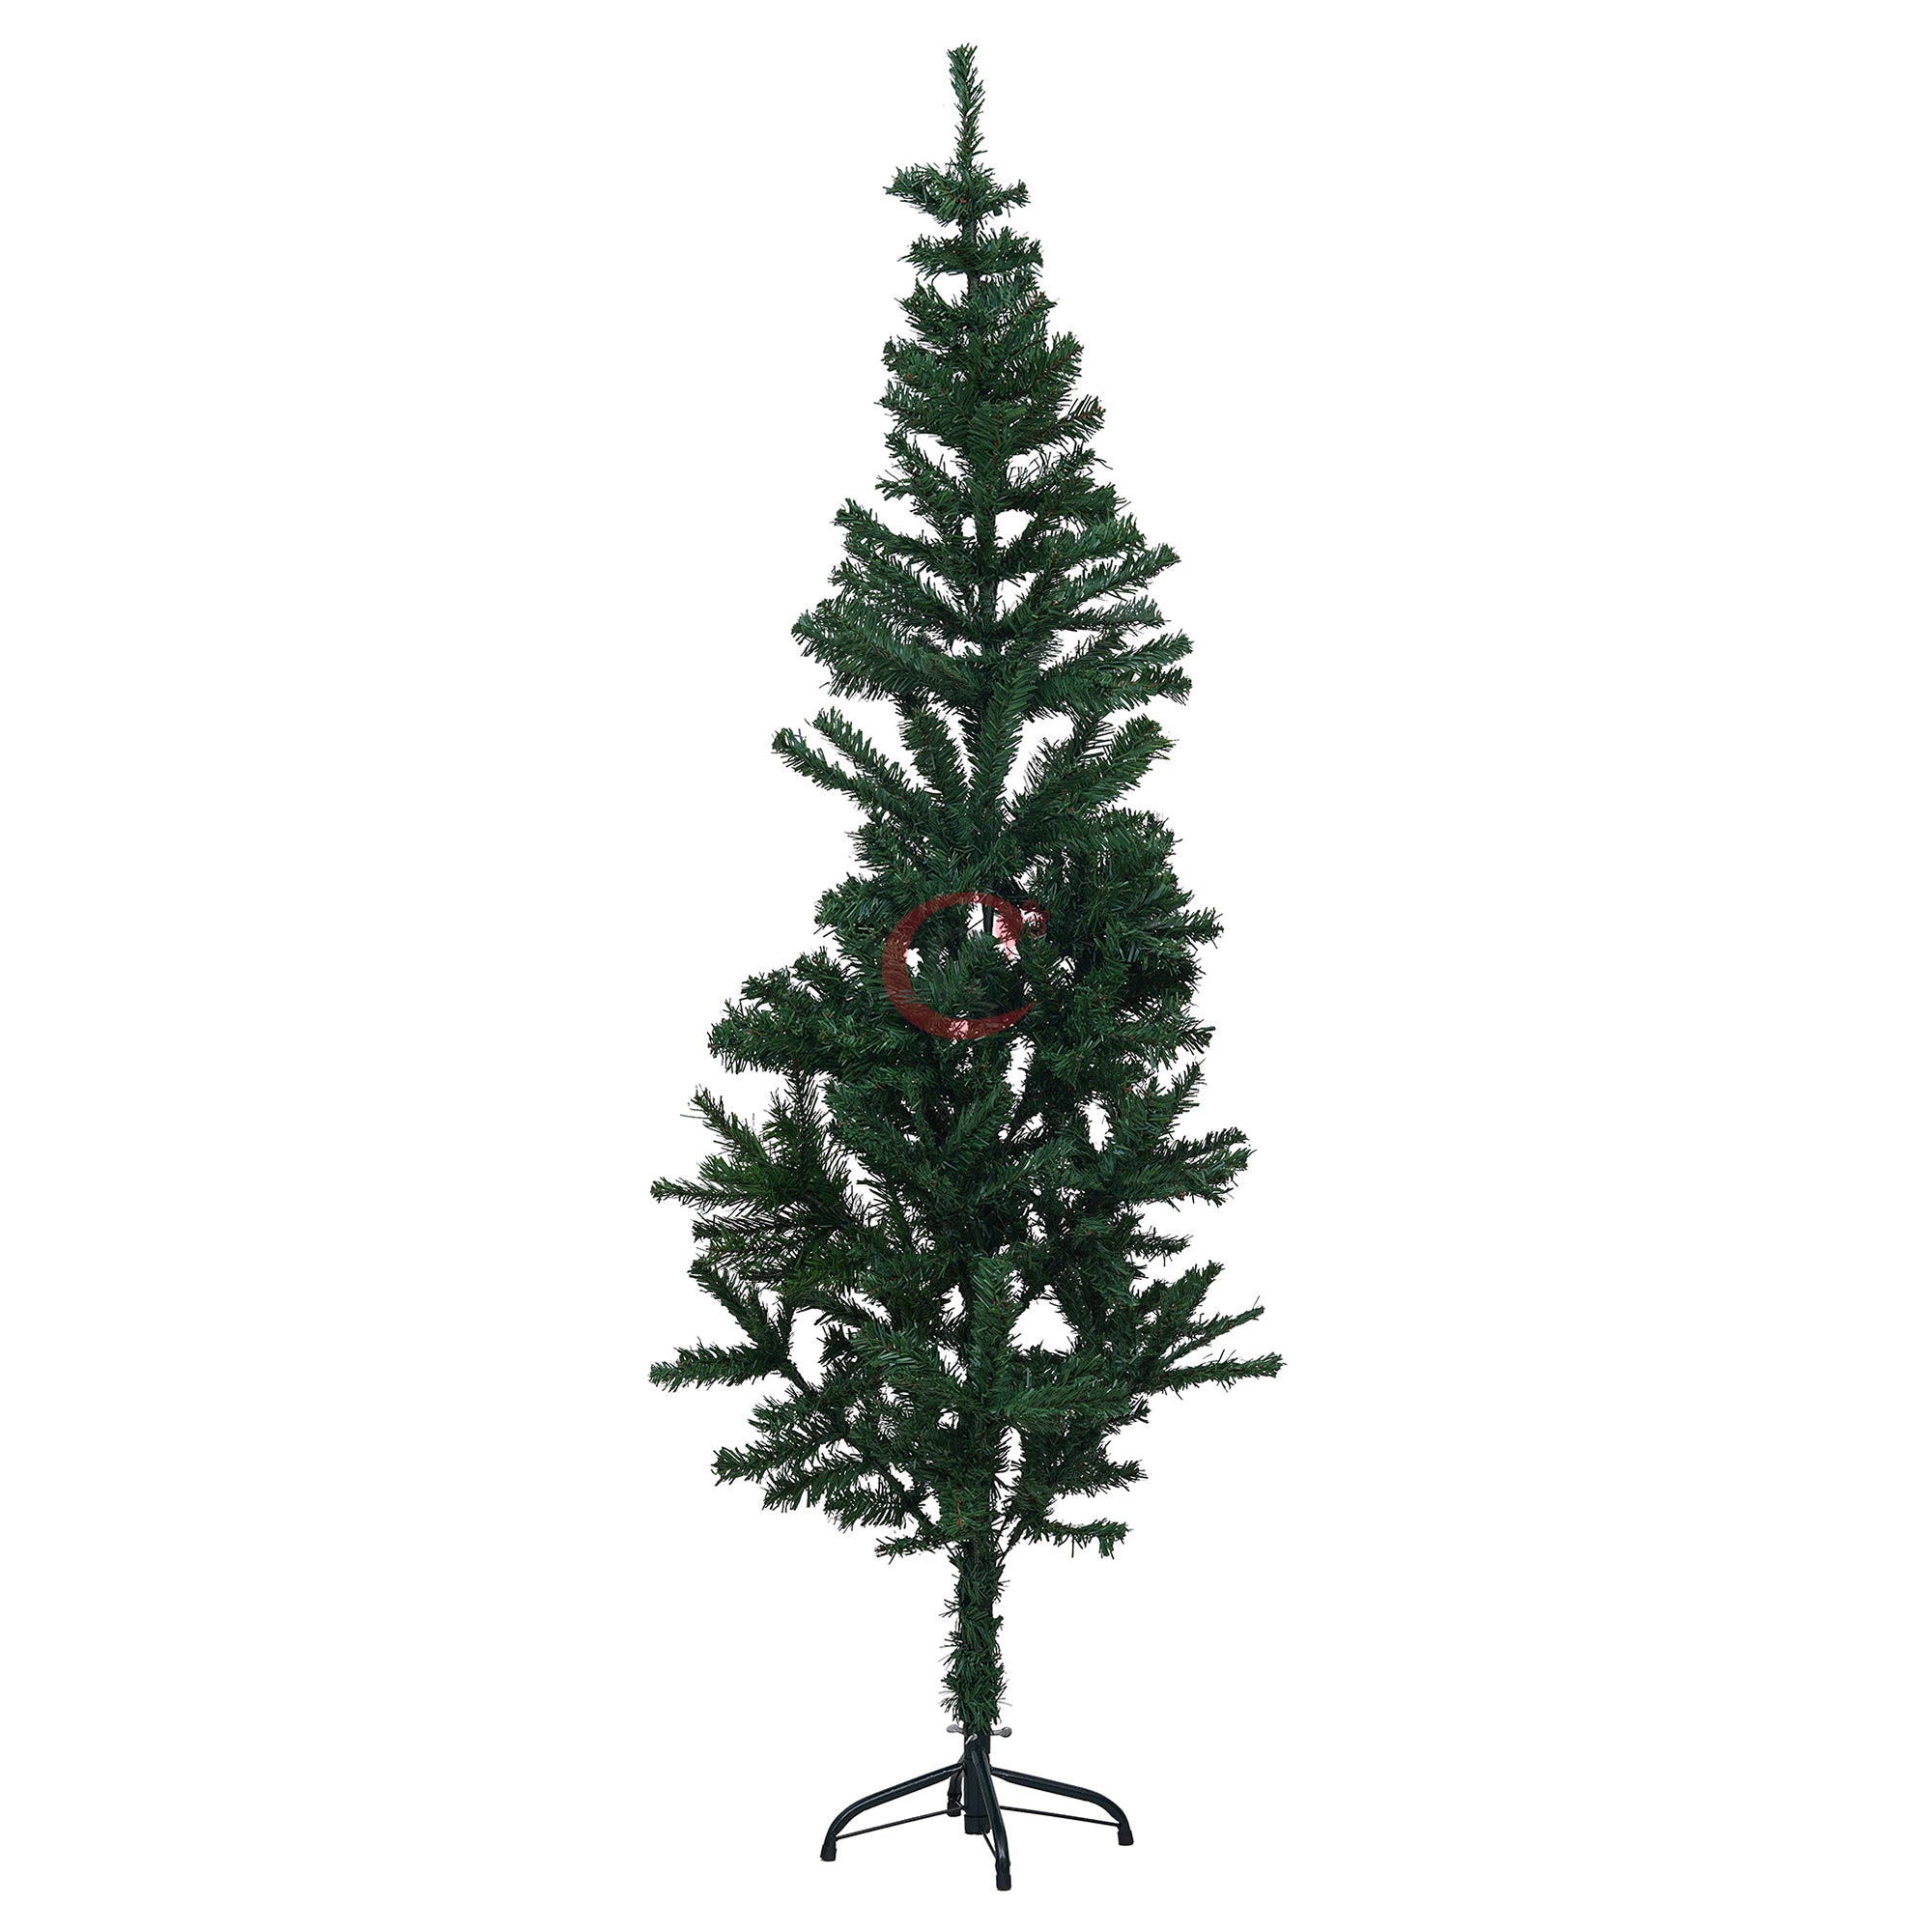 eCraftIndia 5 Feet Green Artificial Christmas Tree Xmas Pine Tree with Stand and 100 Christmas Decoration Ornaments Props - Merry Christmas Decoration Item for Home, Office, and Church 7